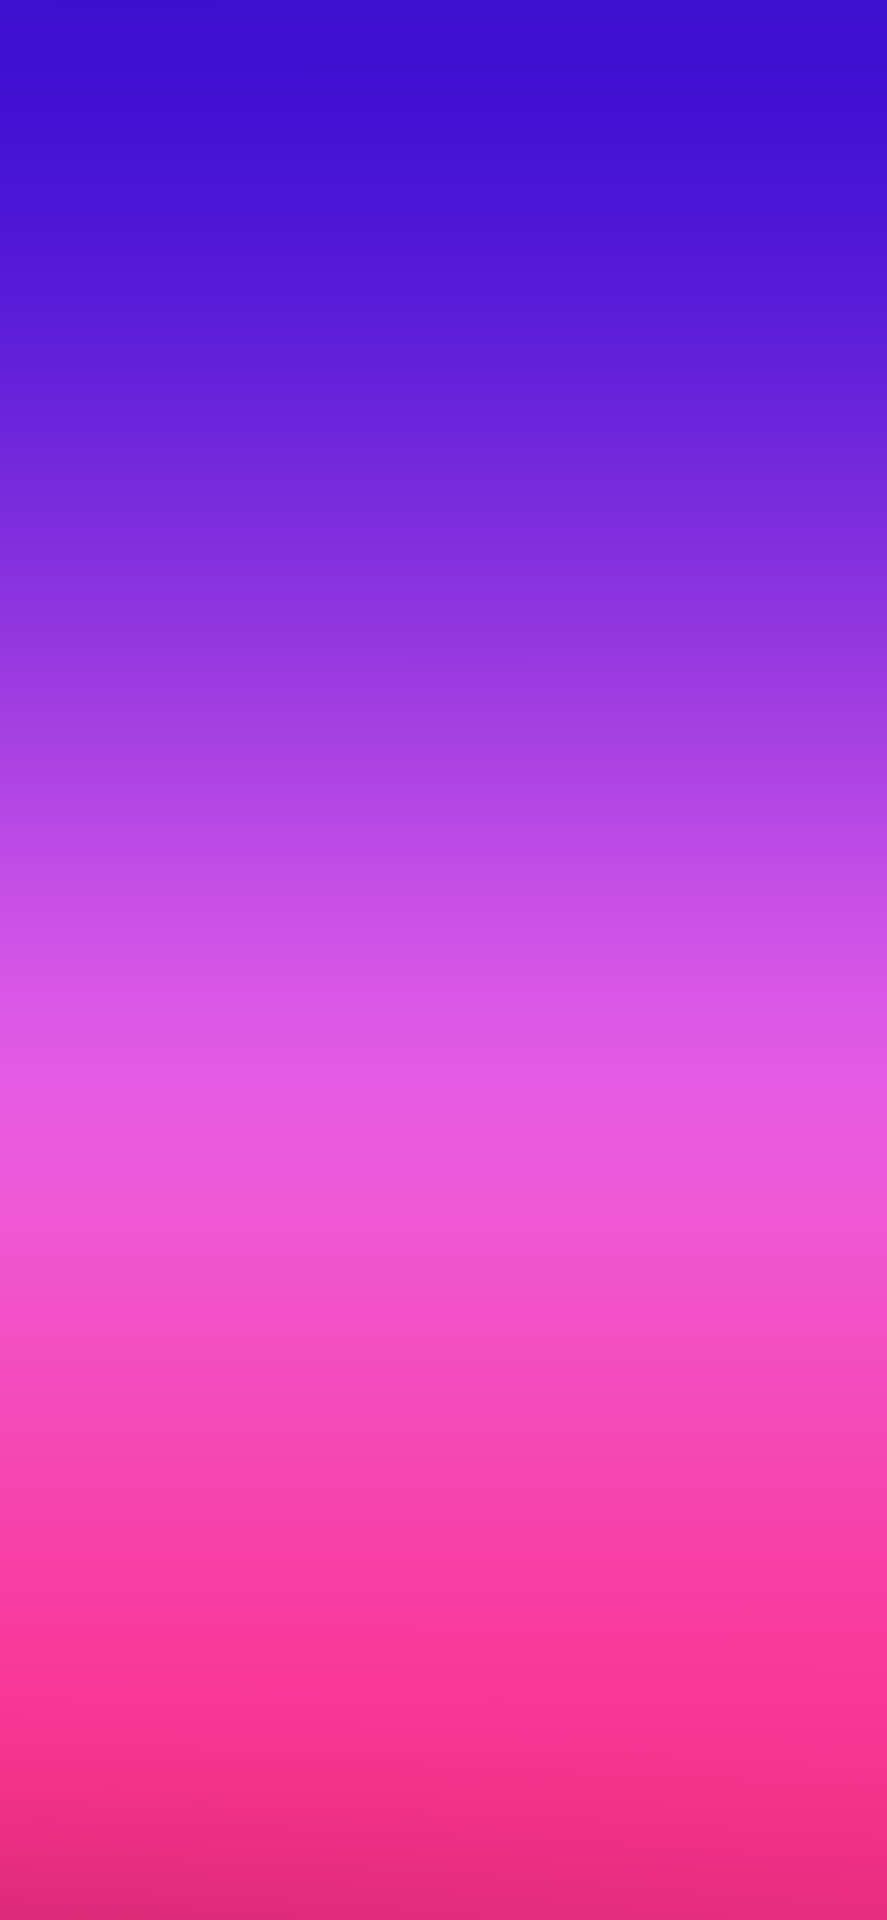 Gradient Blue And Pink Background